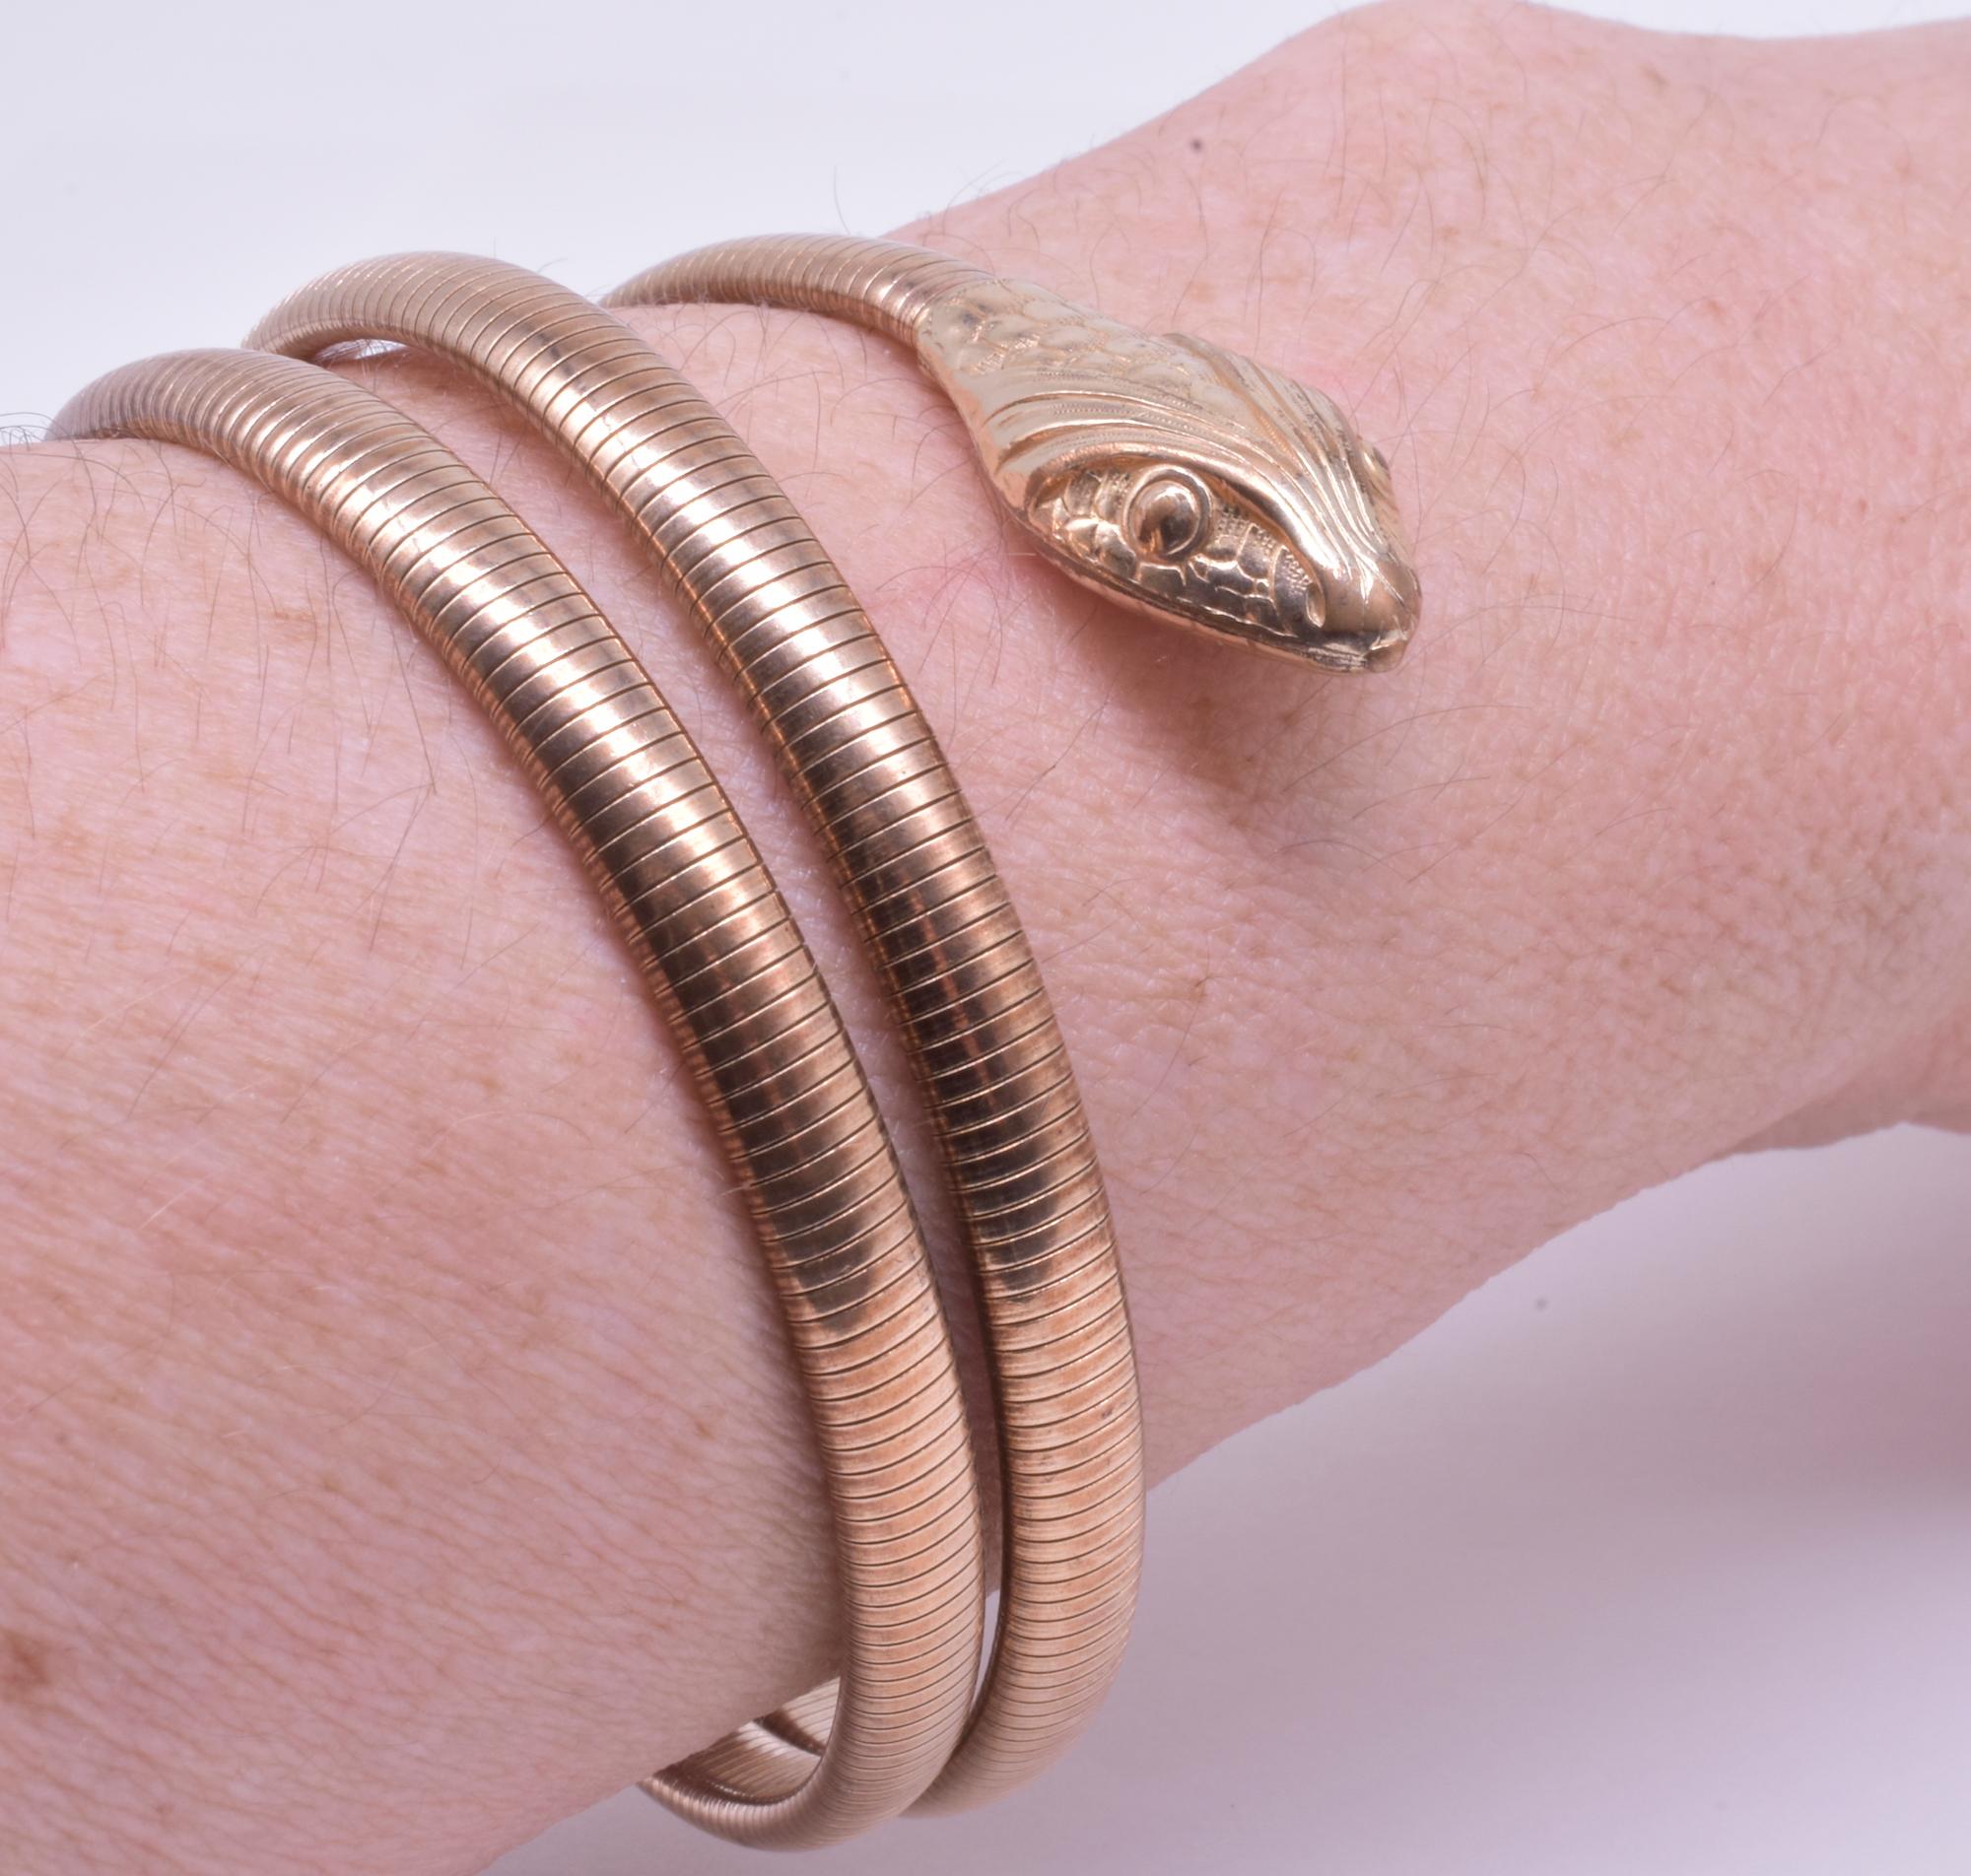 This retro 12K gold filled coiled flexible snake bracelet both fits and looks terrific on every size wrist.  Forstner was an American company based in Irvington NJ that started in 1920 and ceased operations in the 1980's. In their short existence